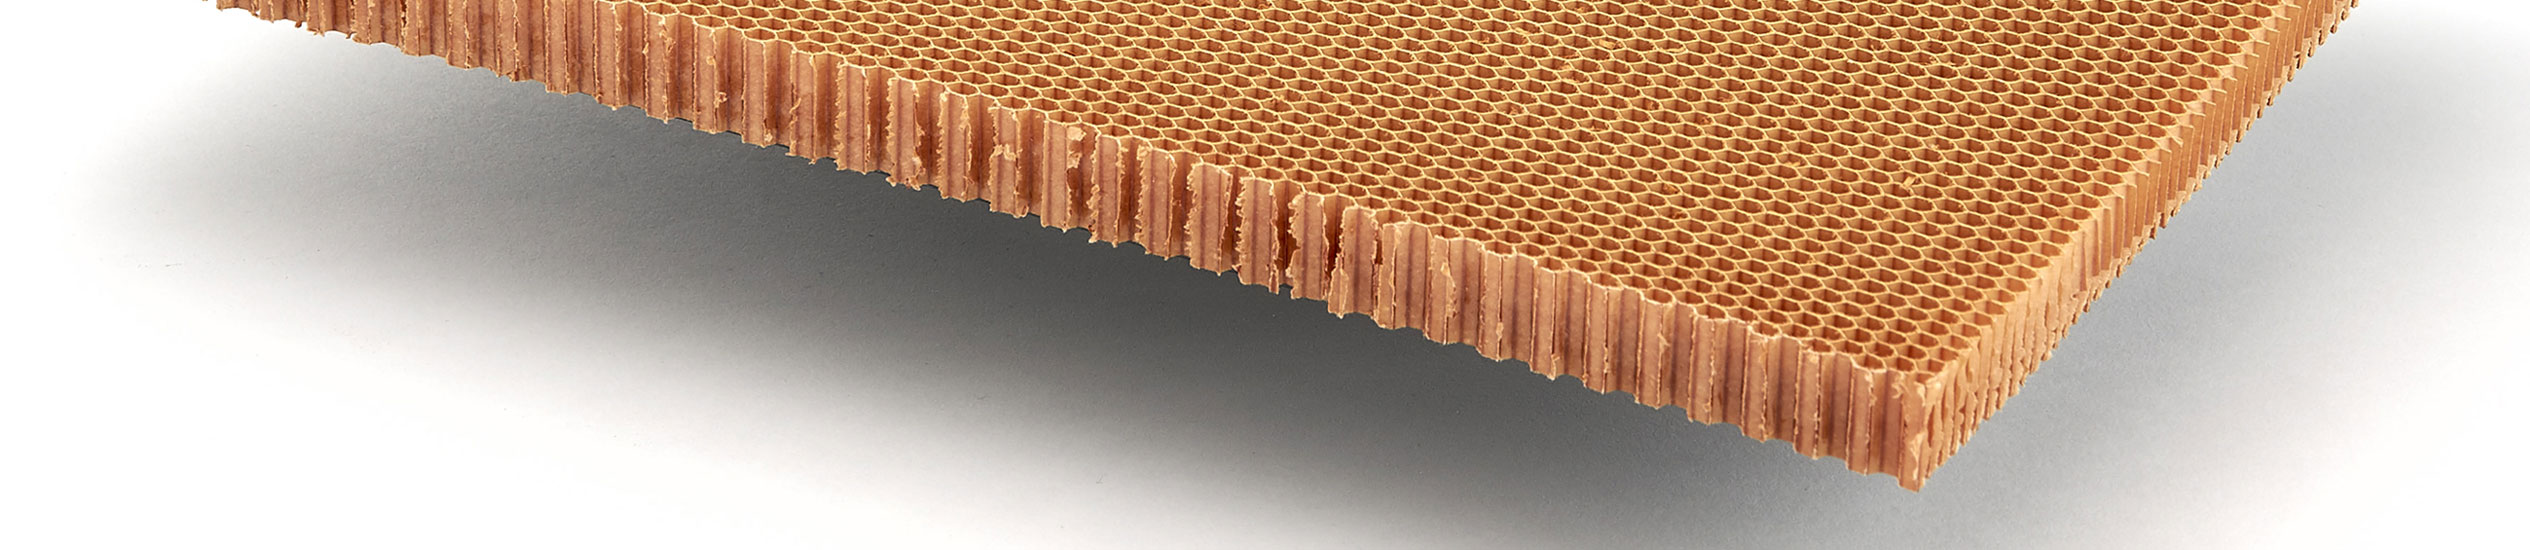 This core material offers unique combination of properties which allows superior electrical insulation.